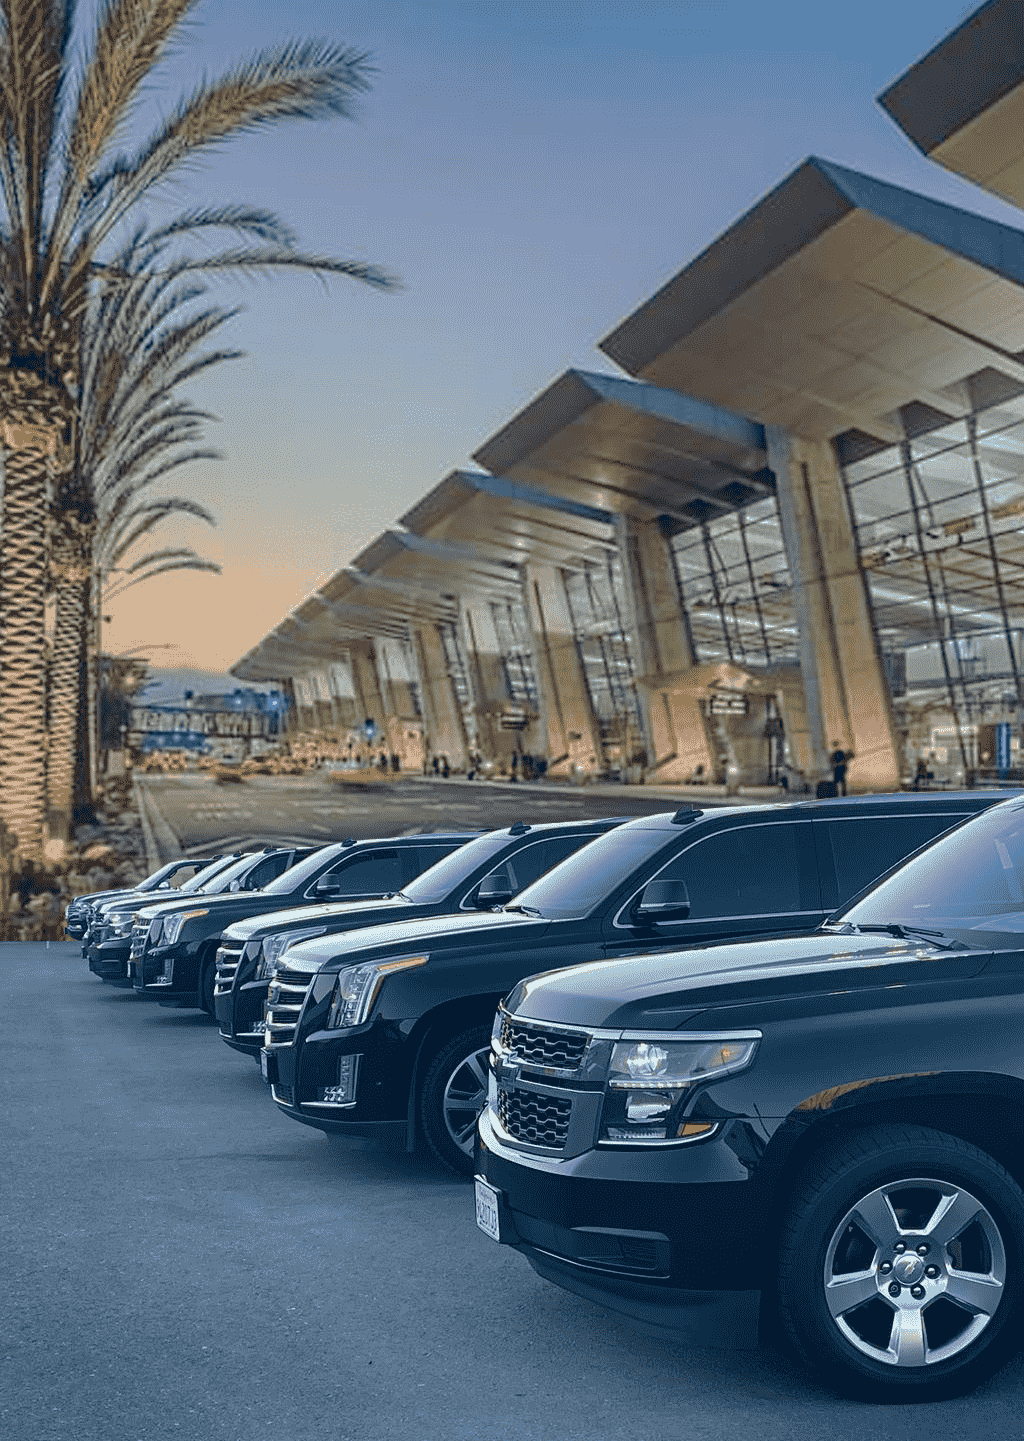 San diego airport limo service